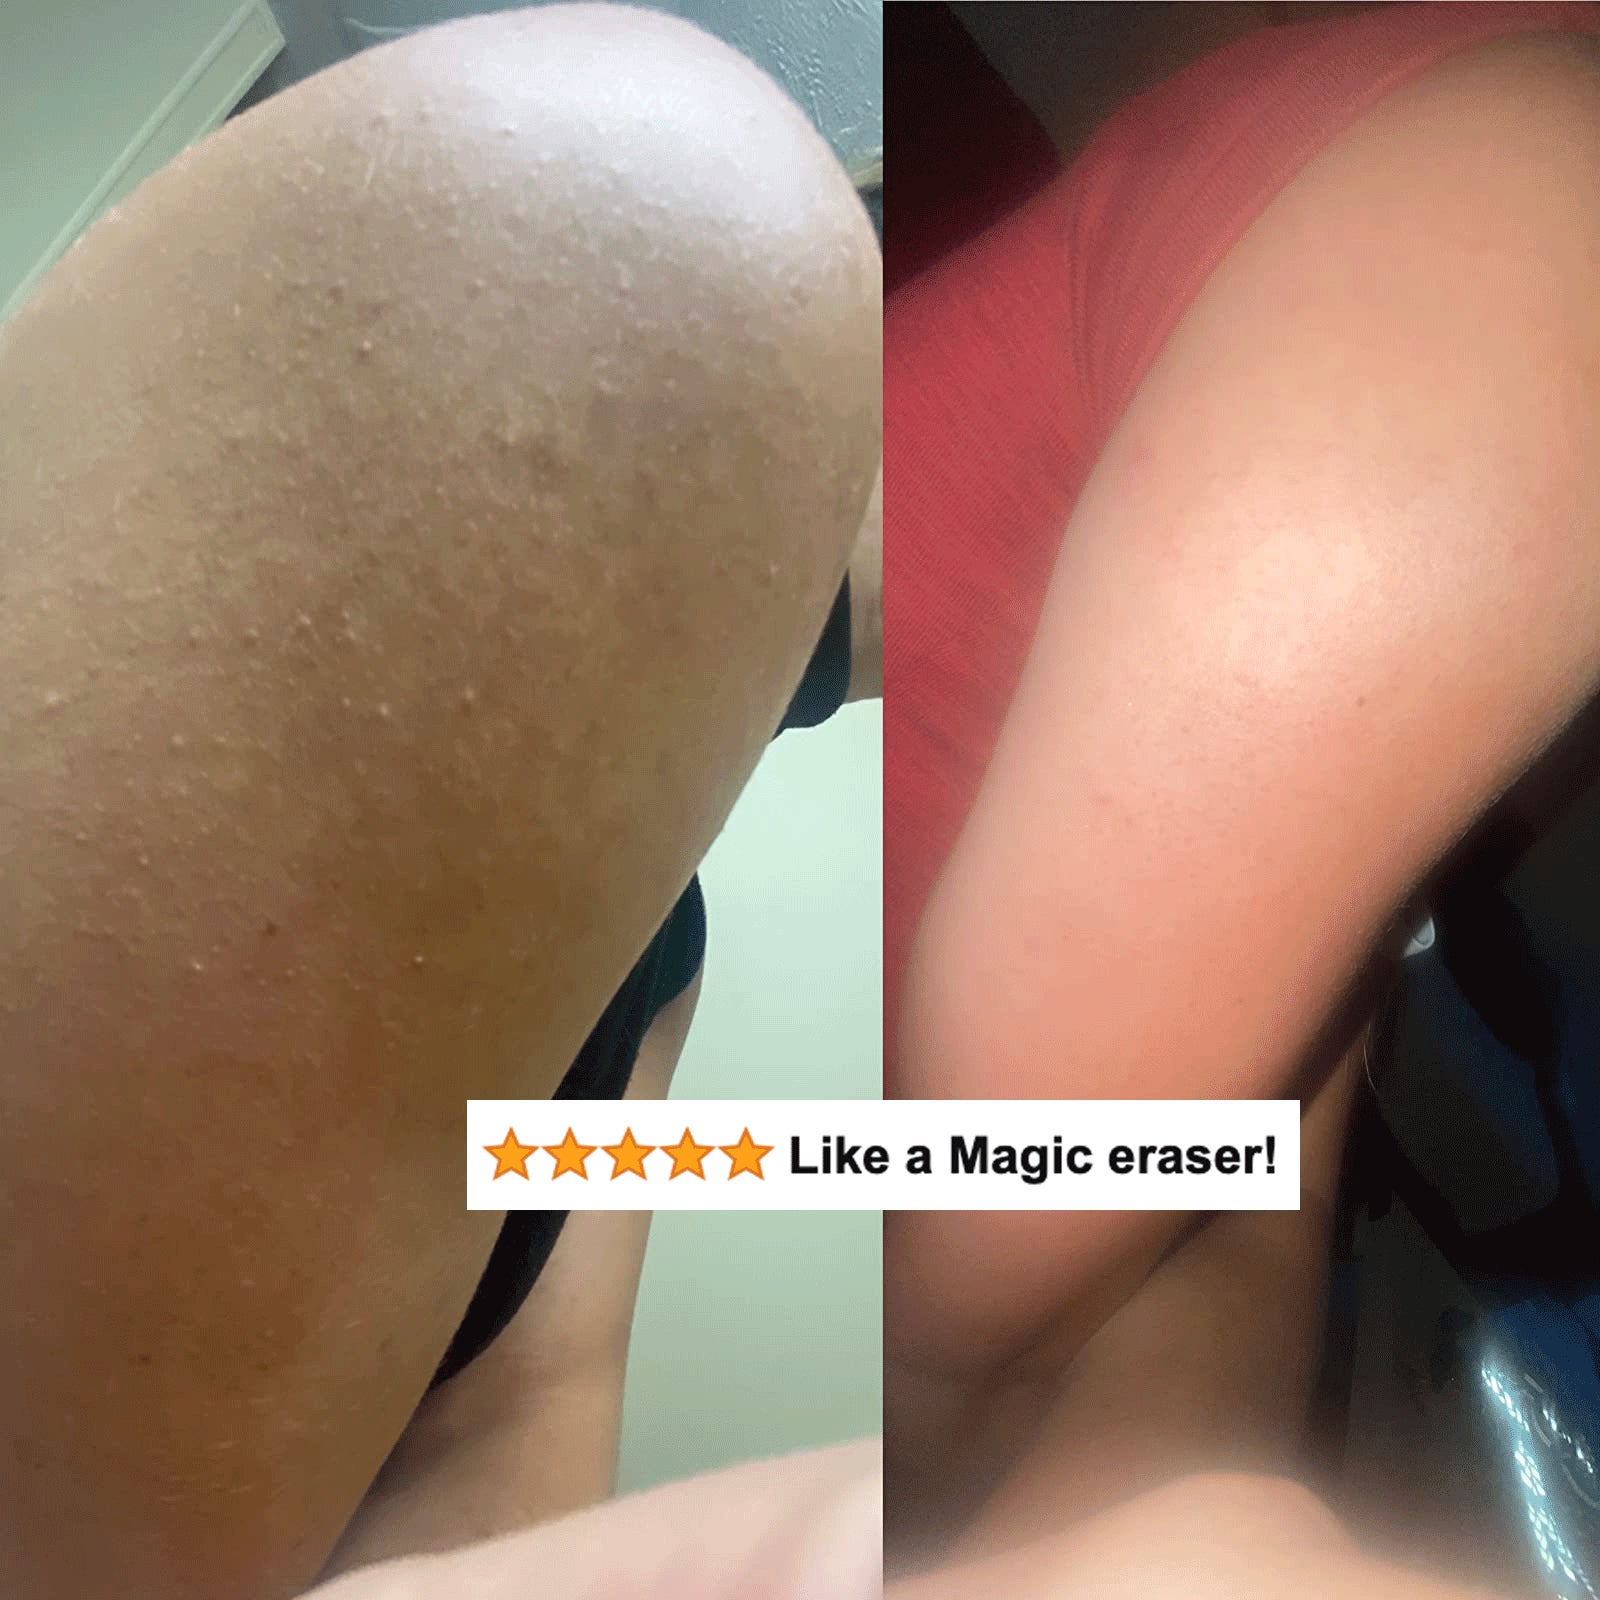 A reviewer's before/after showing the bumpy skin that's now smooth with five-star review text 